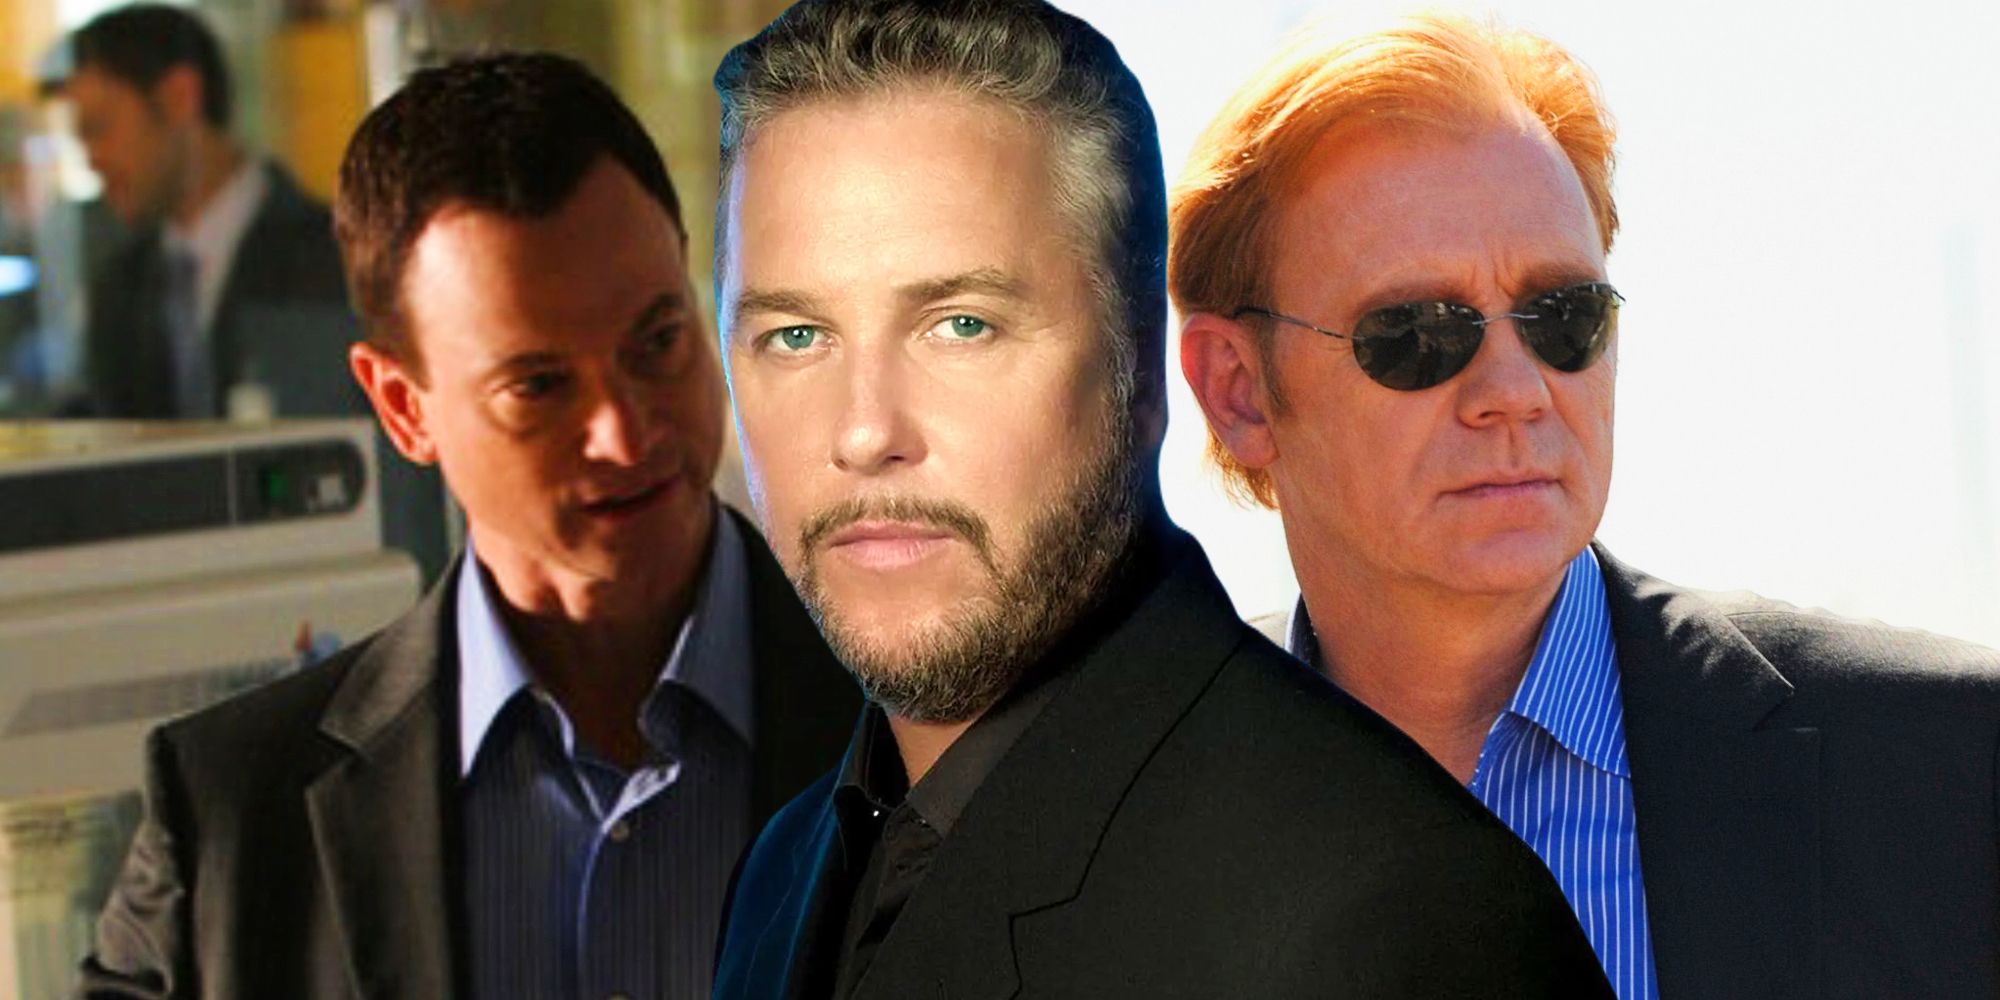 A blended image features CSI characters Taylor, Grissom, and Caine